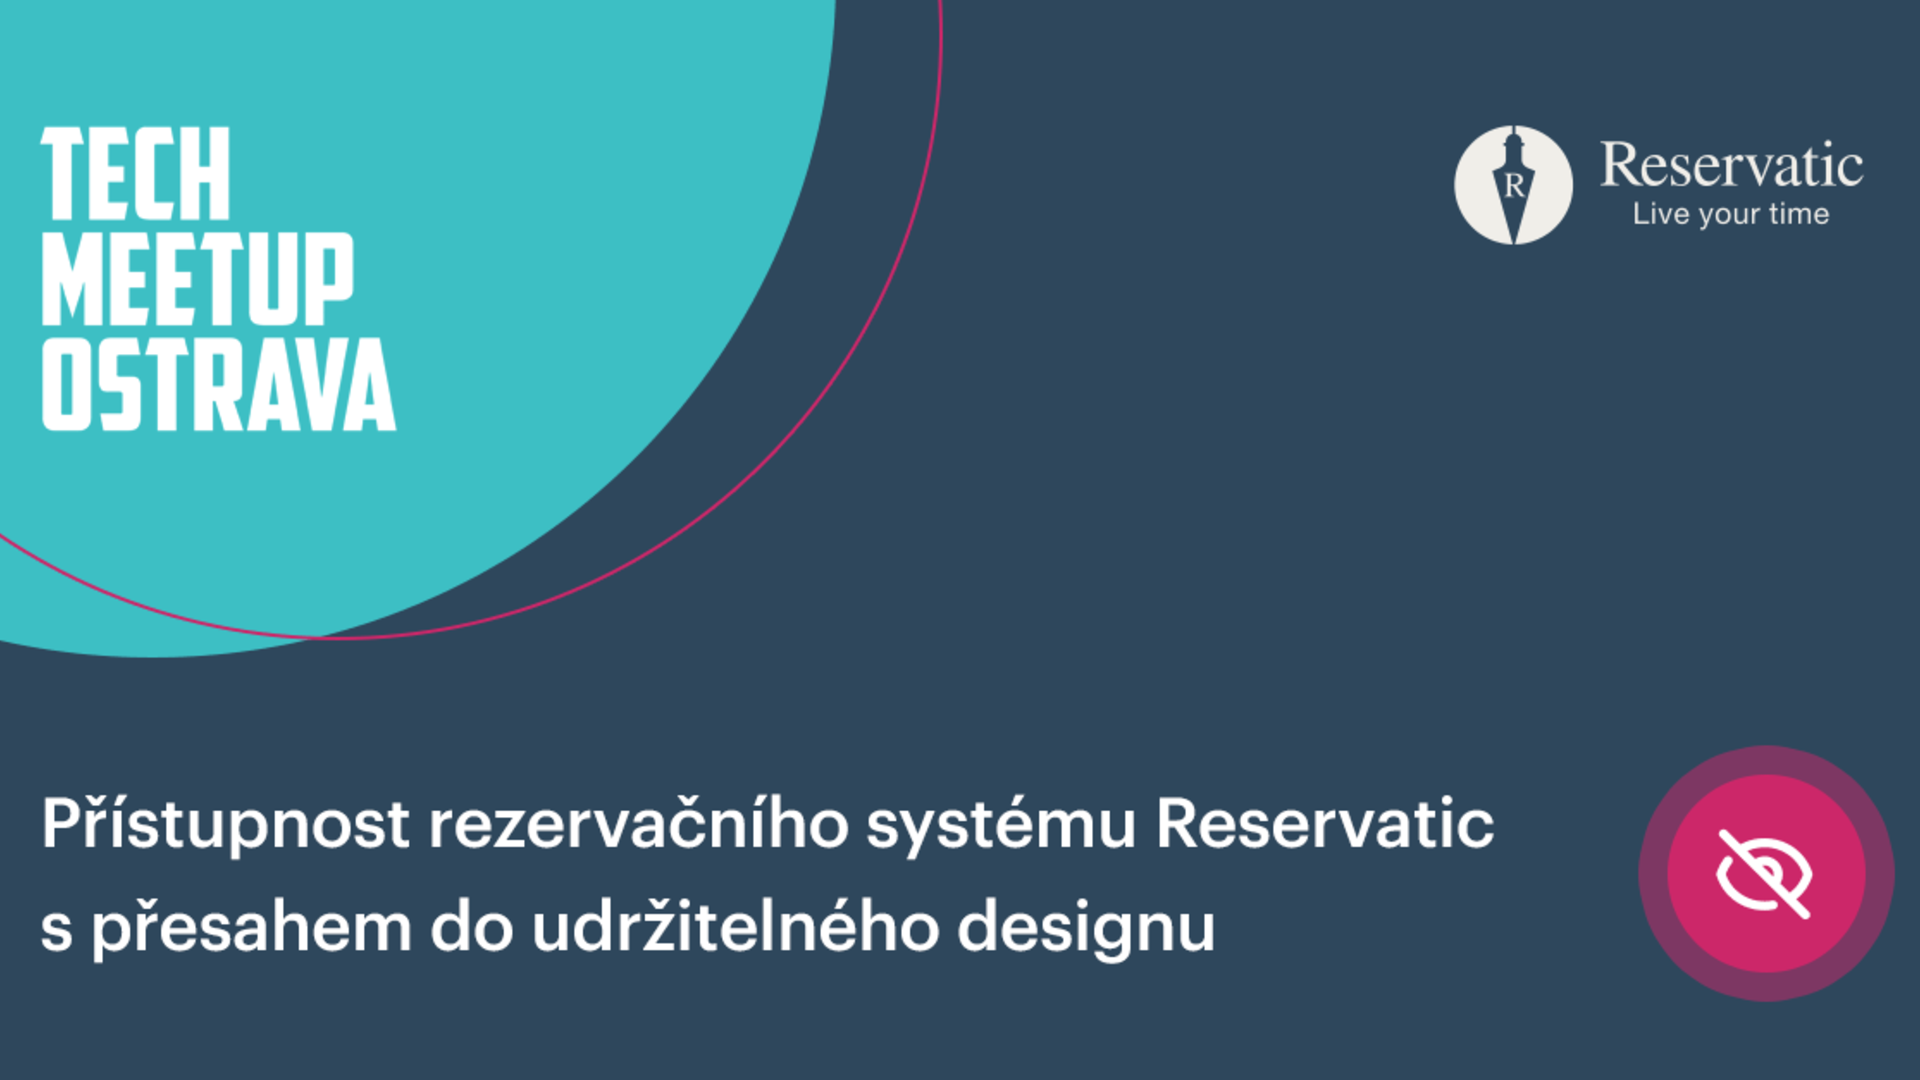 Reservatic and its web accessibility